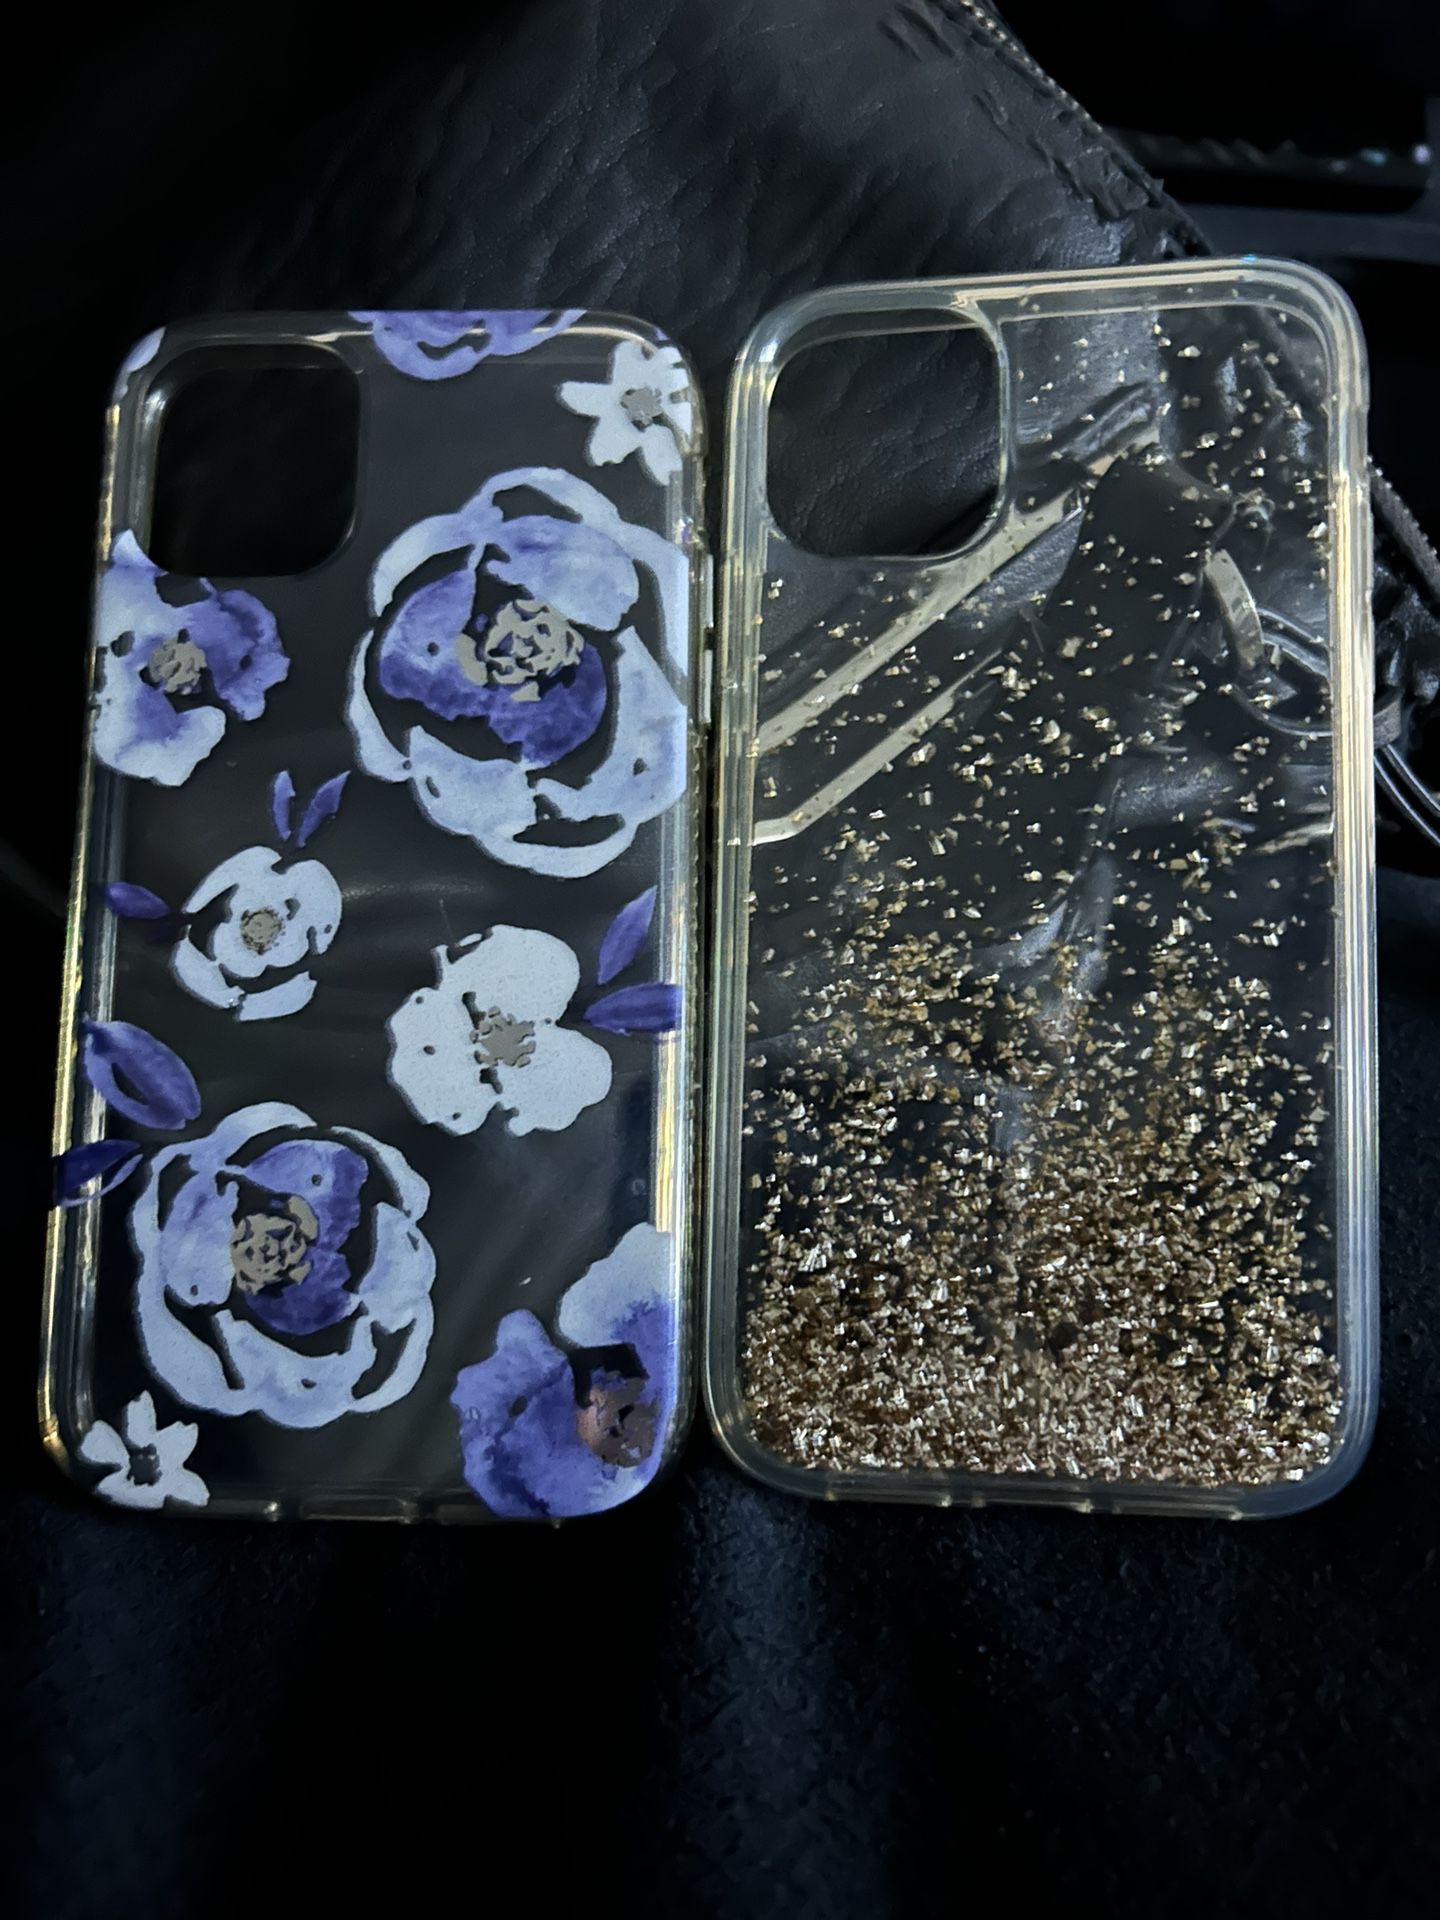 2 New Without Box IPhone 11 Cases 